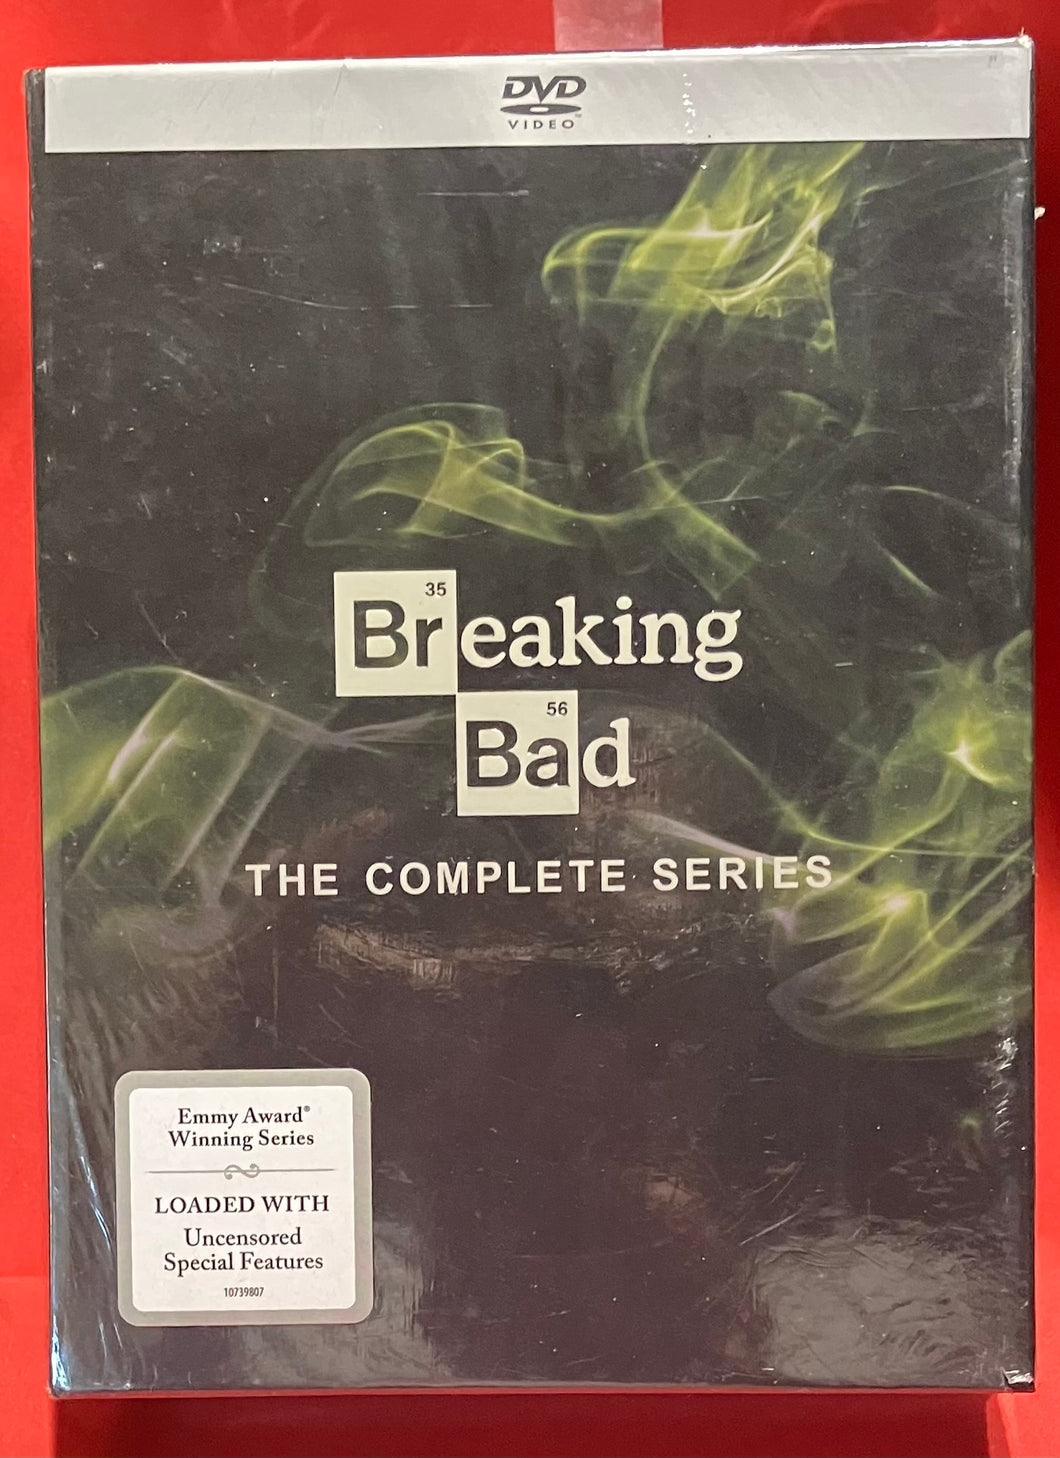 BREAKING BAD - THE COMPLETE SERIES - DVD (SEALED)